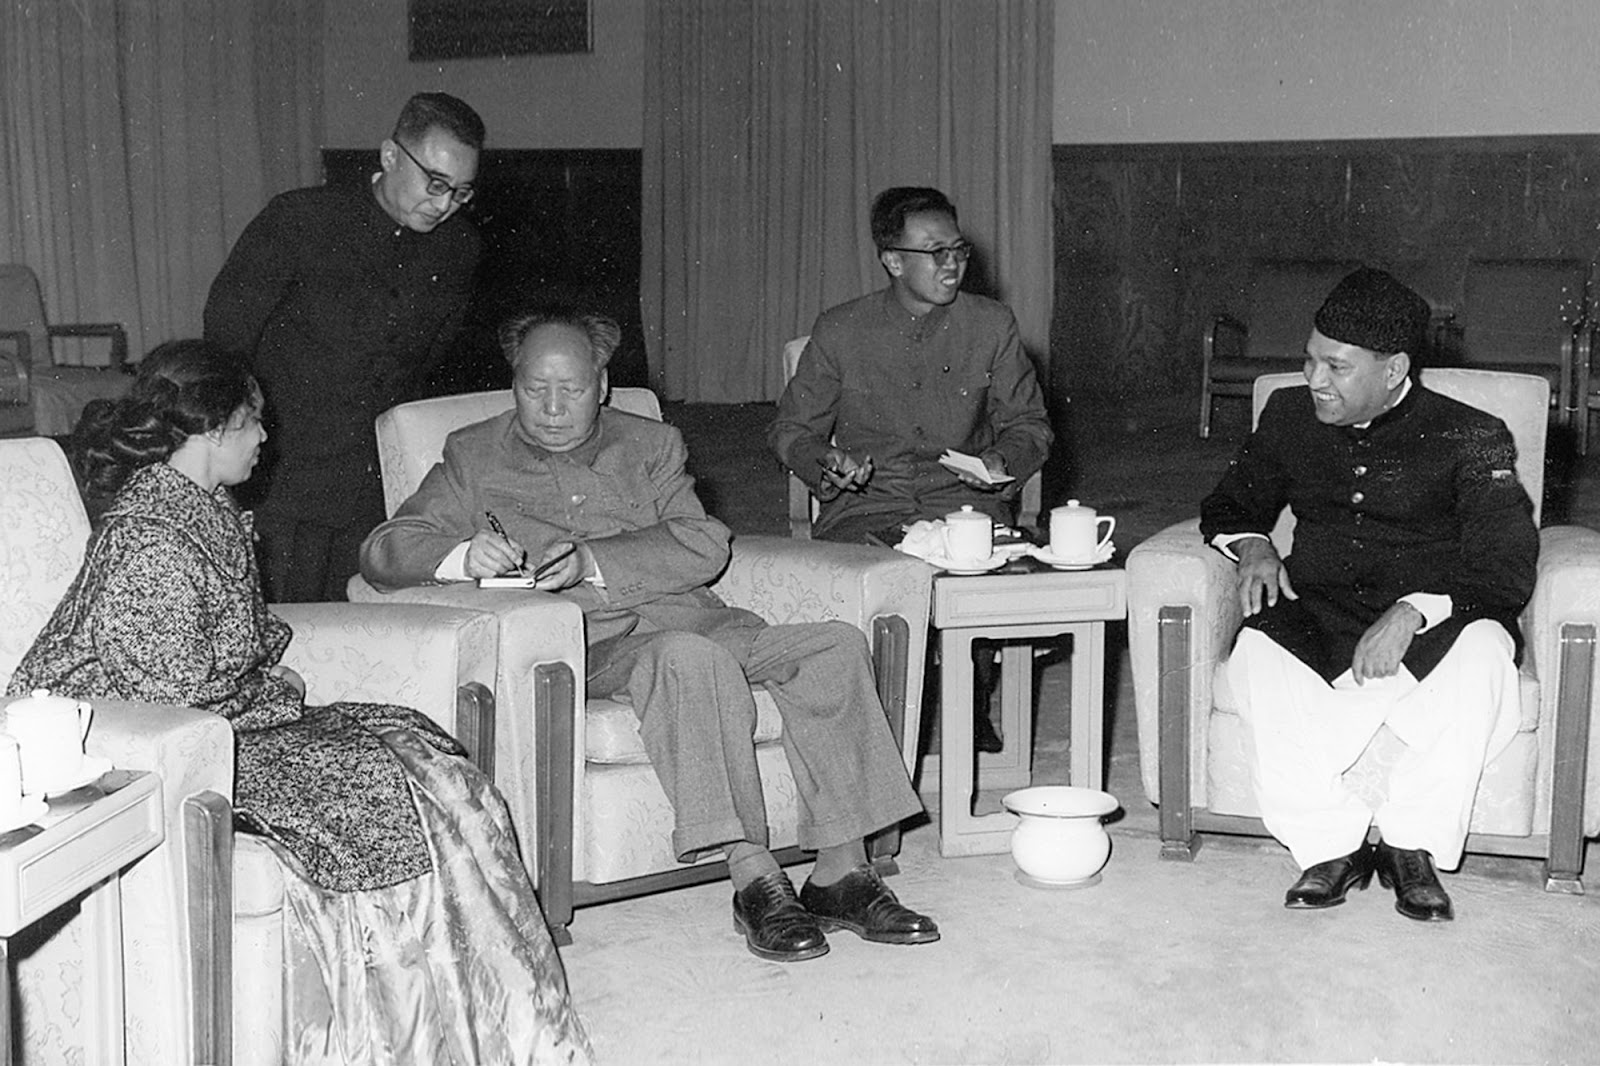 Photograph of Chairman Mao signing the Little Red Book for Foreign Minister Pirzada’s wife.